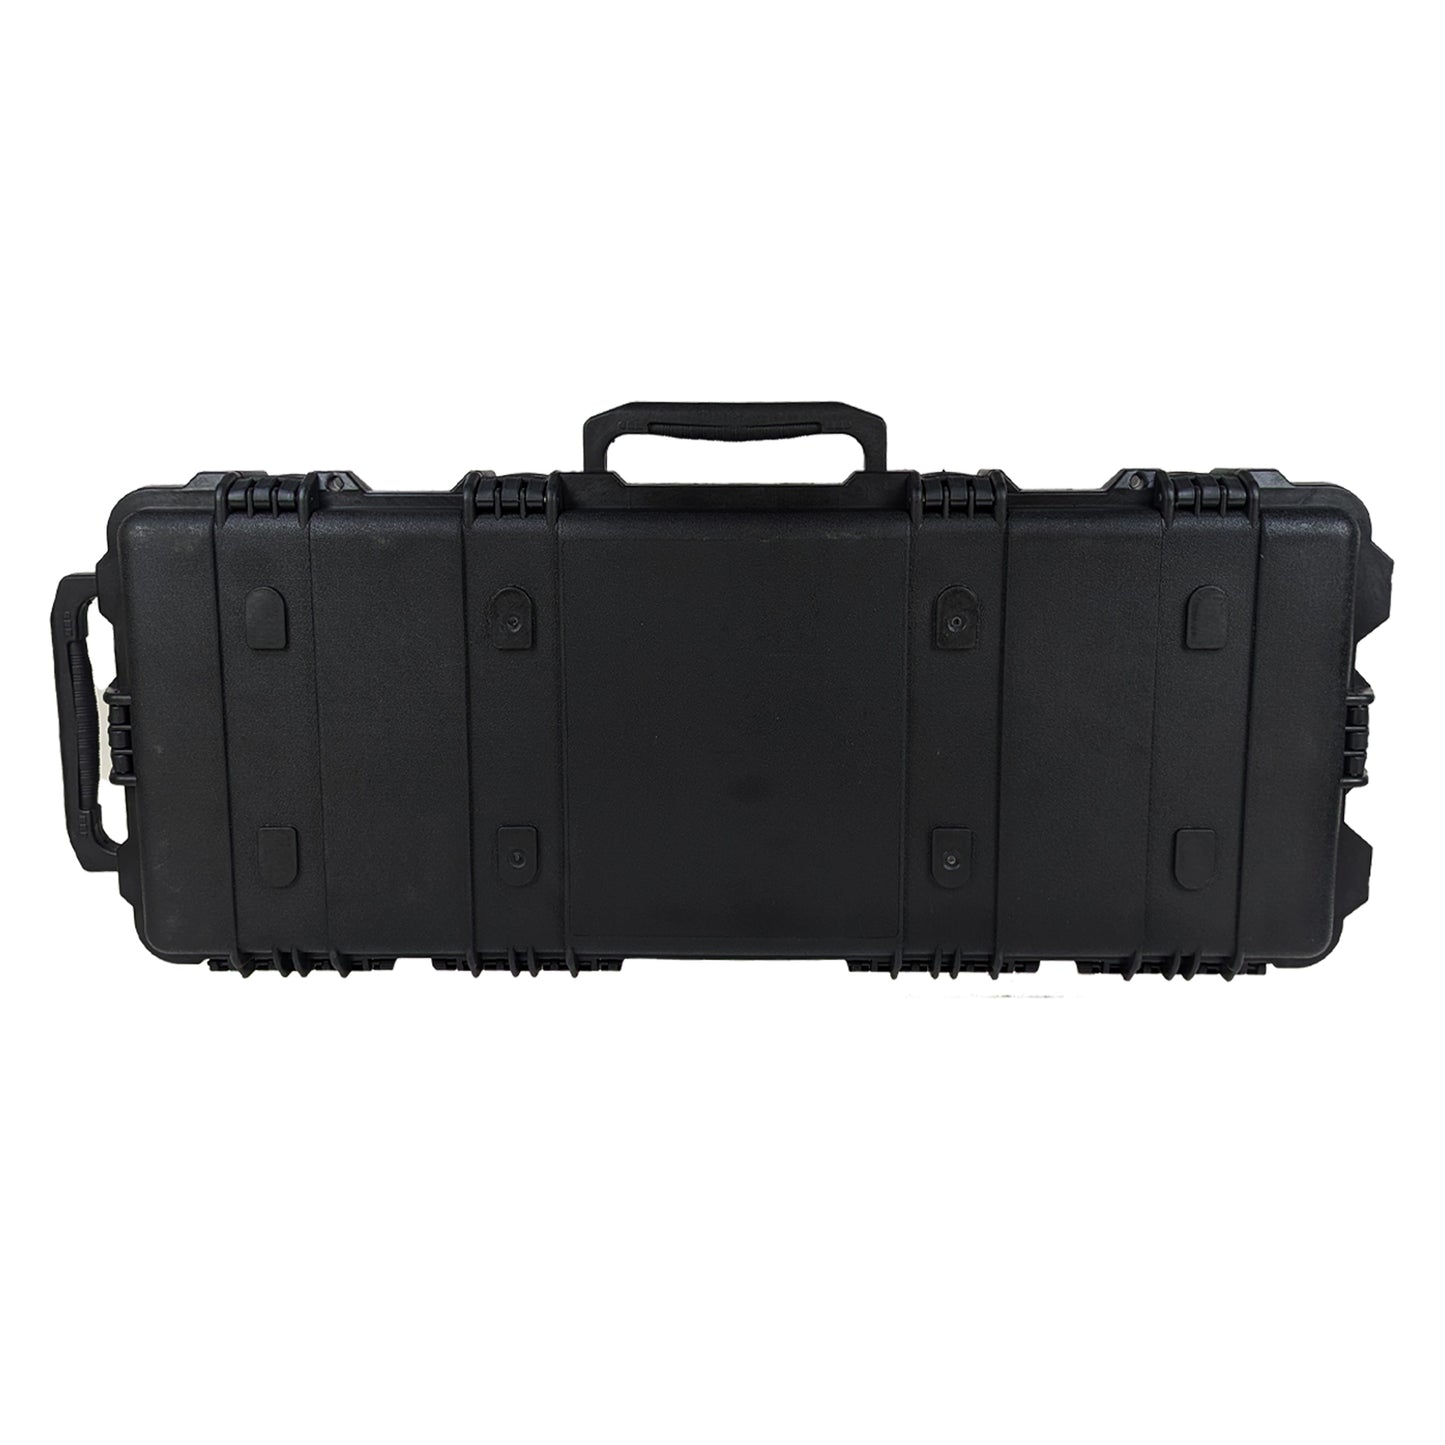 40.5" x 16.5" x 6.5" Protective Roller Tactical Rifle Hard Case with Foam, Mil-Spec Waterproof & Crushproof, Two Rifles Or Multiple Guns, Pressure Valve with Lockable Fittings Black